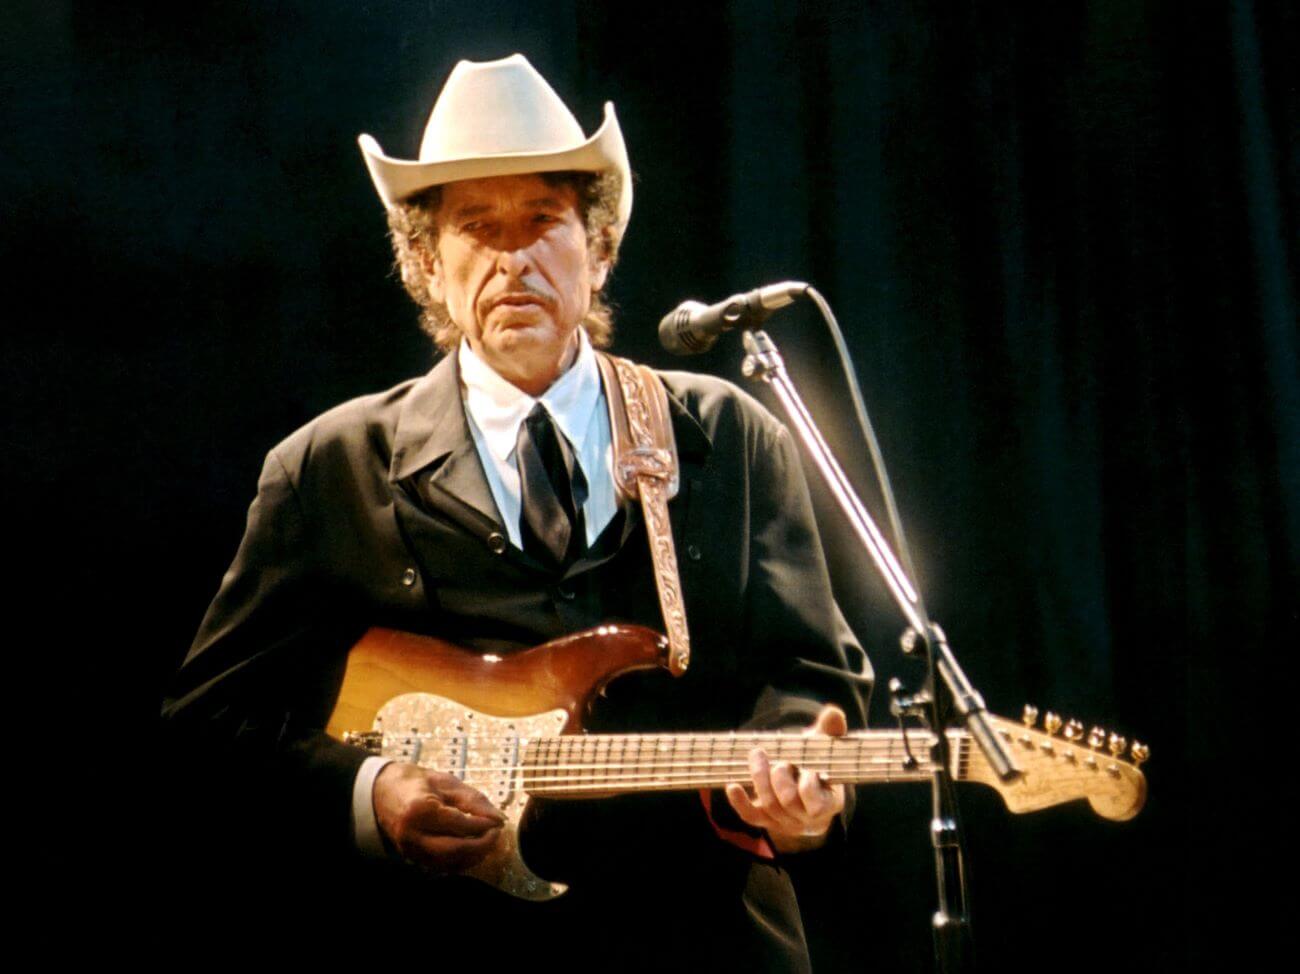 Bob Dylan wears a cowboy hat and holds a guitar in front of a microphone.